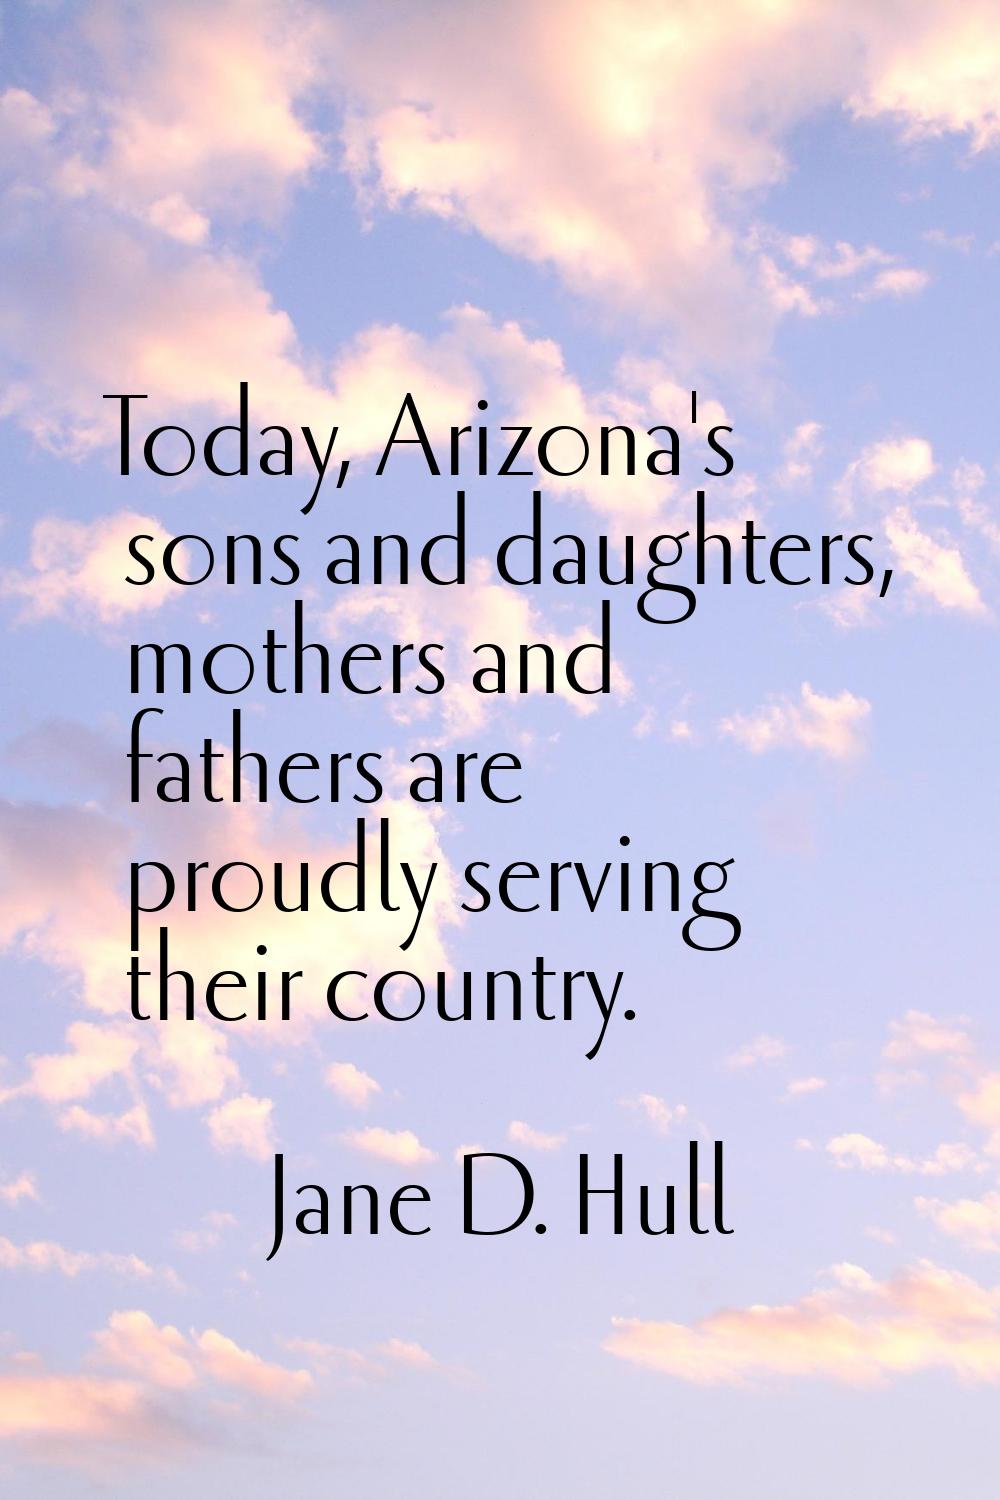 Today, Arizona's sons and daughters, mothers and fathers are proudly serving their country.